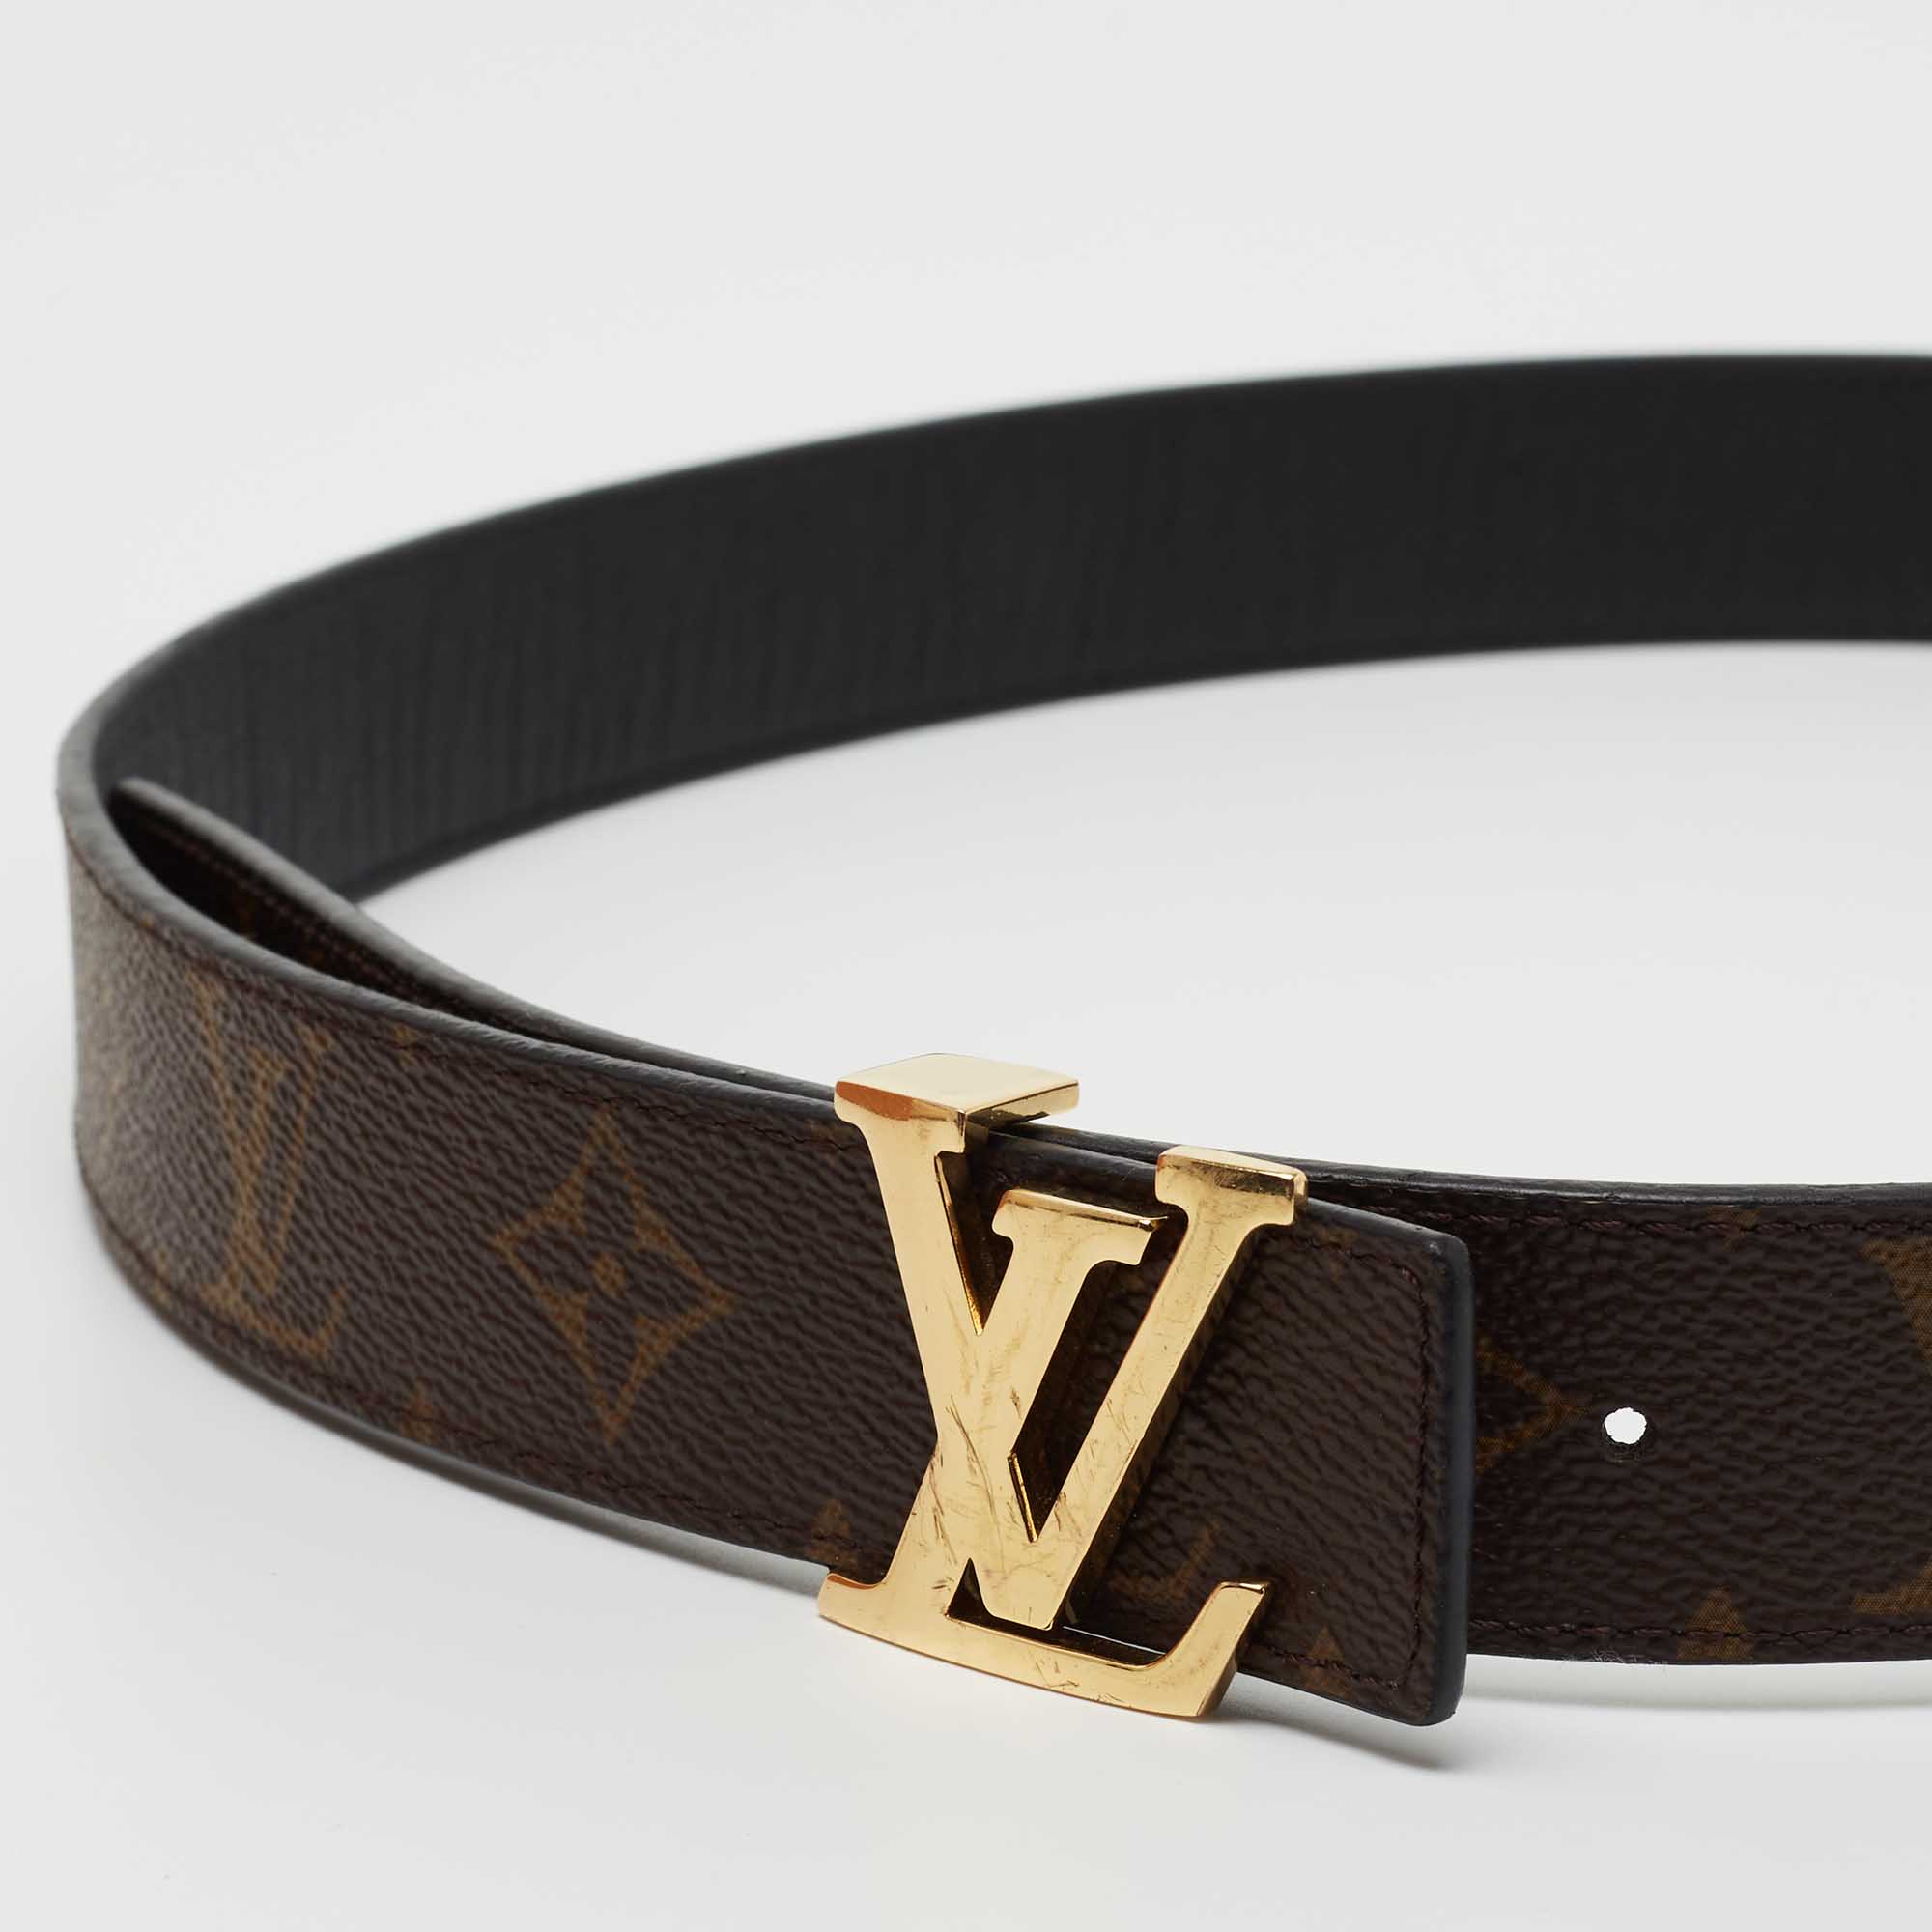 Louis Vuitton Monogram Canvas Belt. Size 85 cm. Made in Spain. With dustbag  & box ❤️